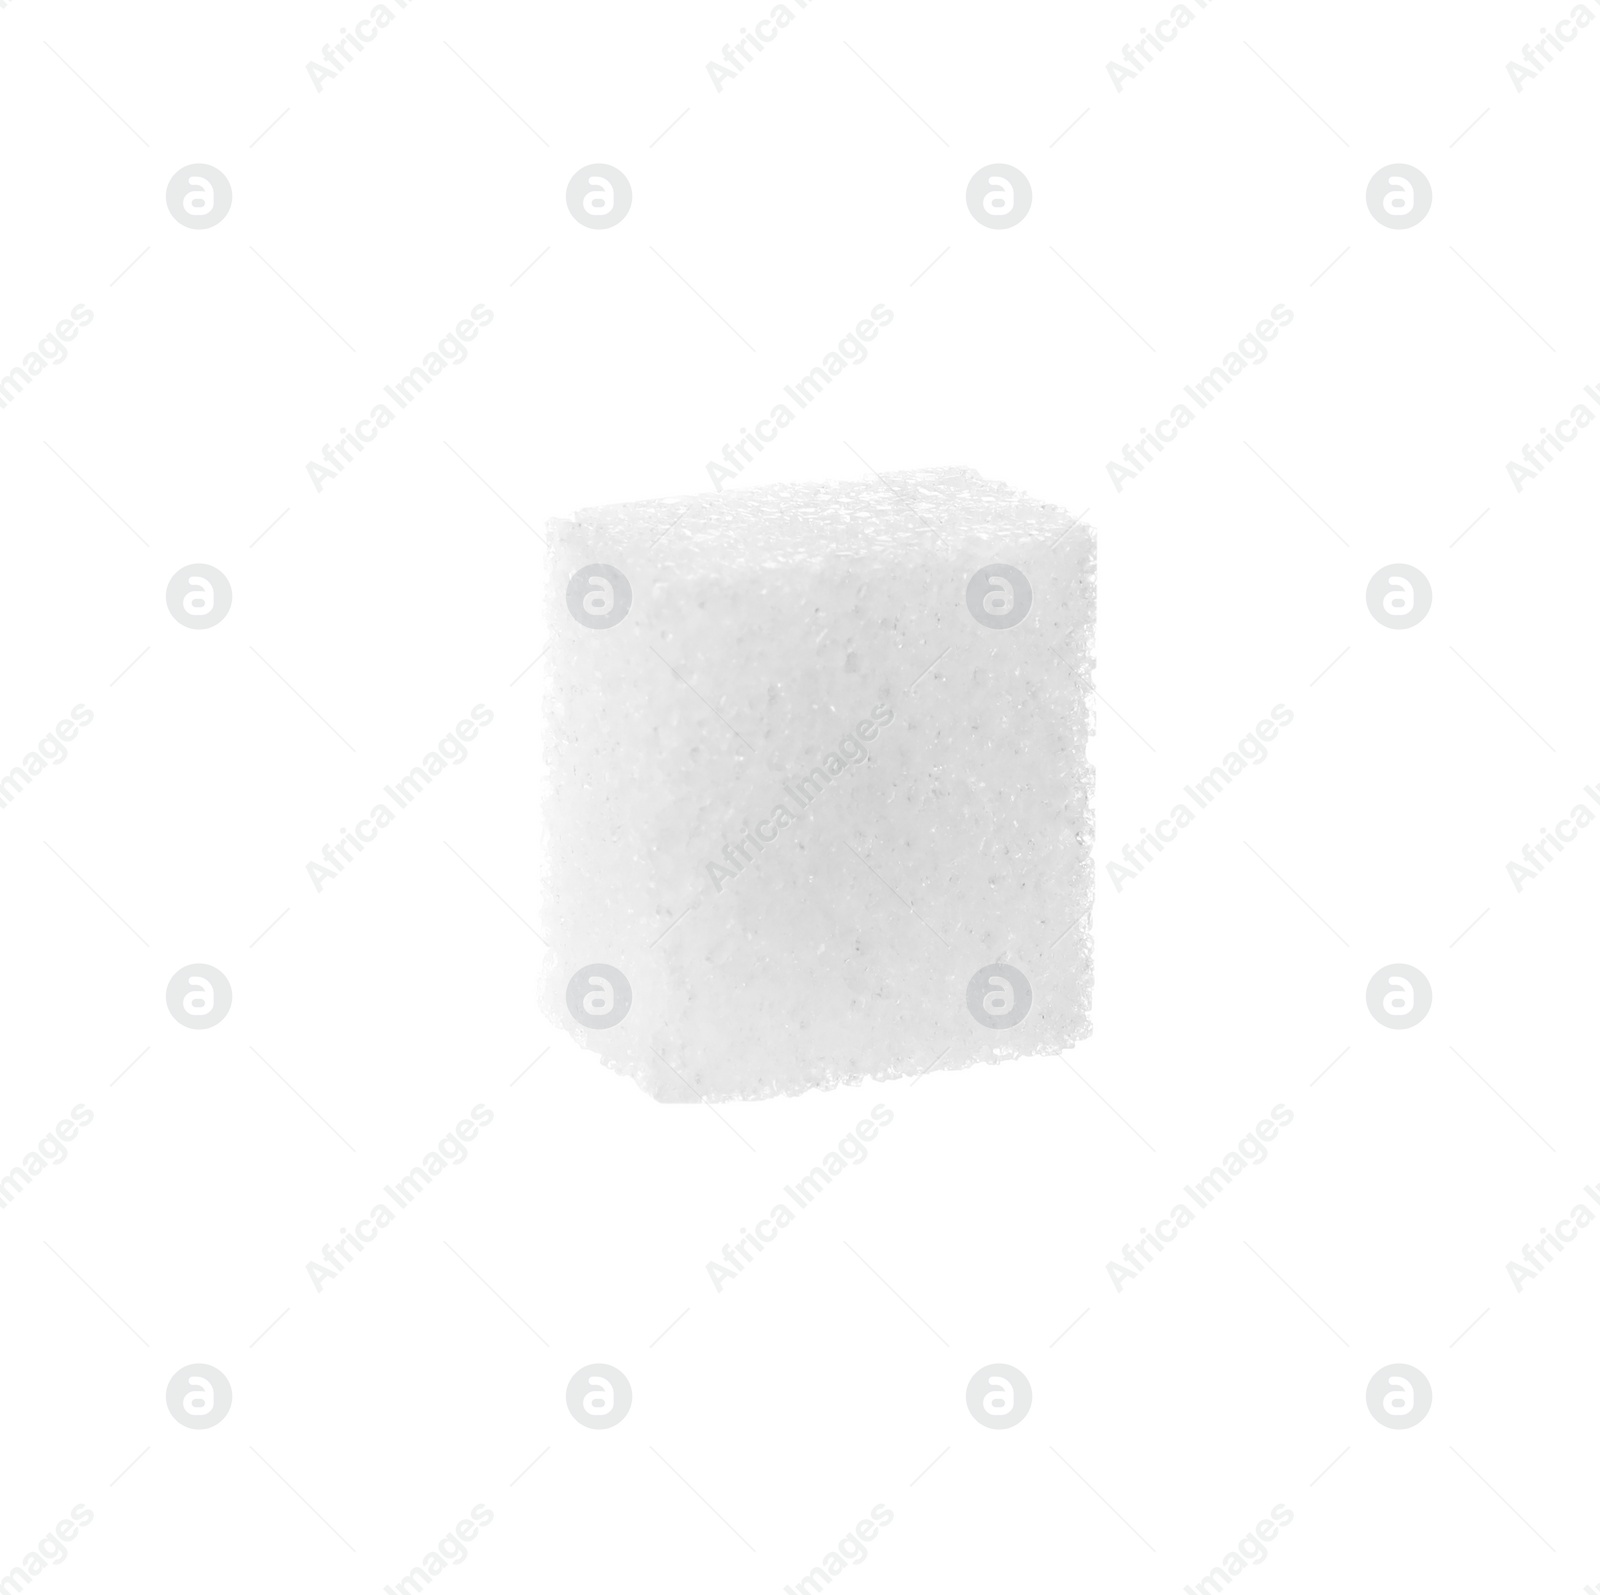 Photo of One refined sugar cube isolated on white